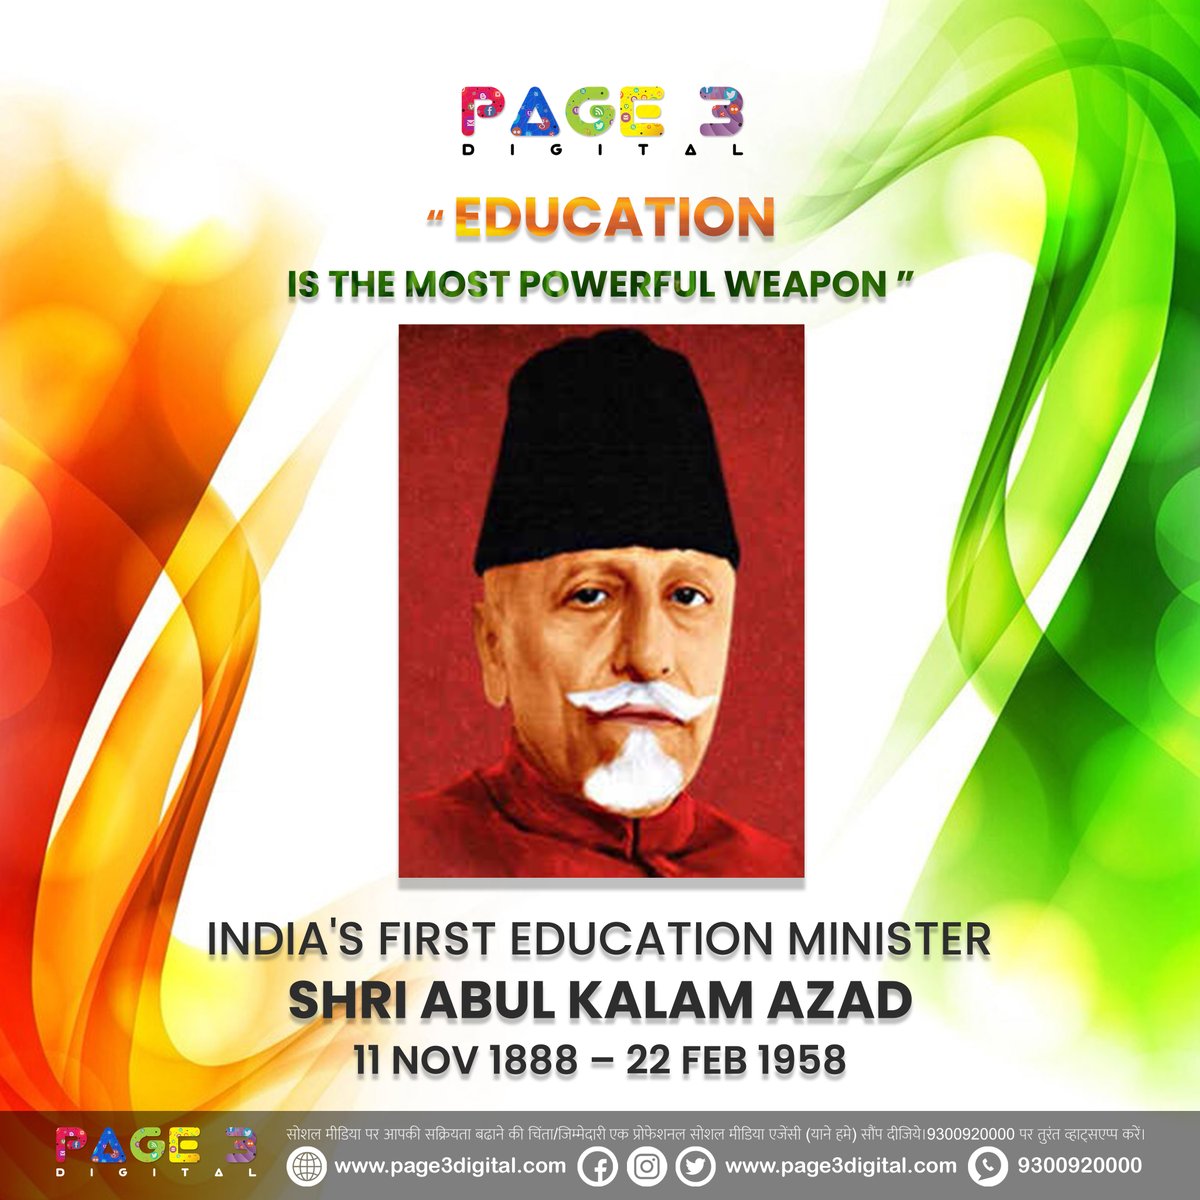 'Education is the most Powerful Weapon'

India's First Education Minister Shri Abul Kalam Azad

#MaulanaAzad #AbulKalamAzad #MaulanaAbulKalamAzad #NationalEducationDay #JamaMasjid #अबुलकलामआज़ाद #शिक्षामंत्री #educationminister #deathanniversary #abulkalam #firsteducationminister